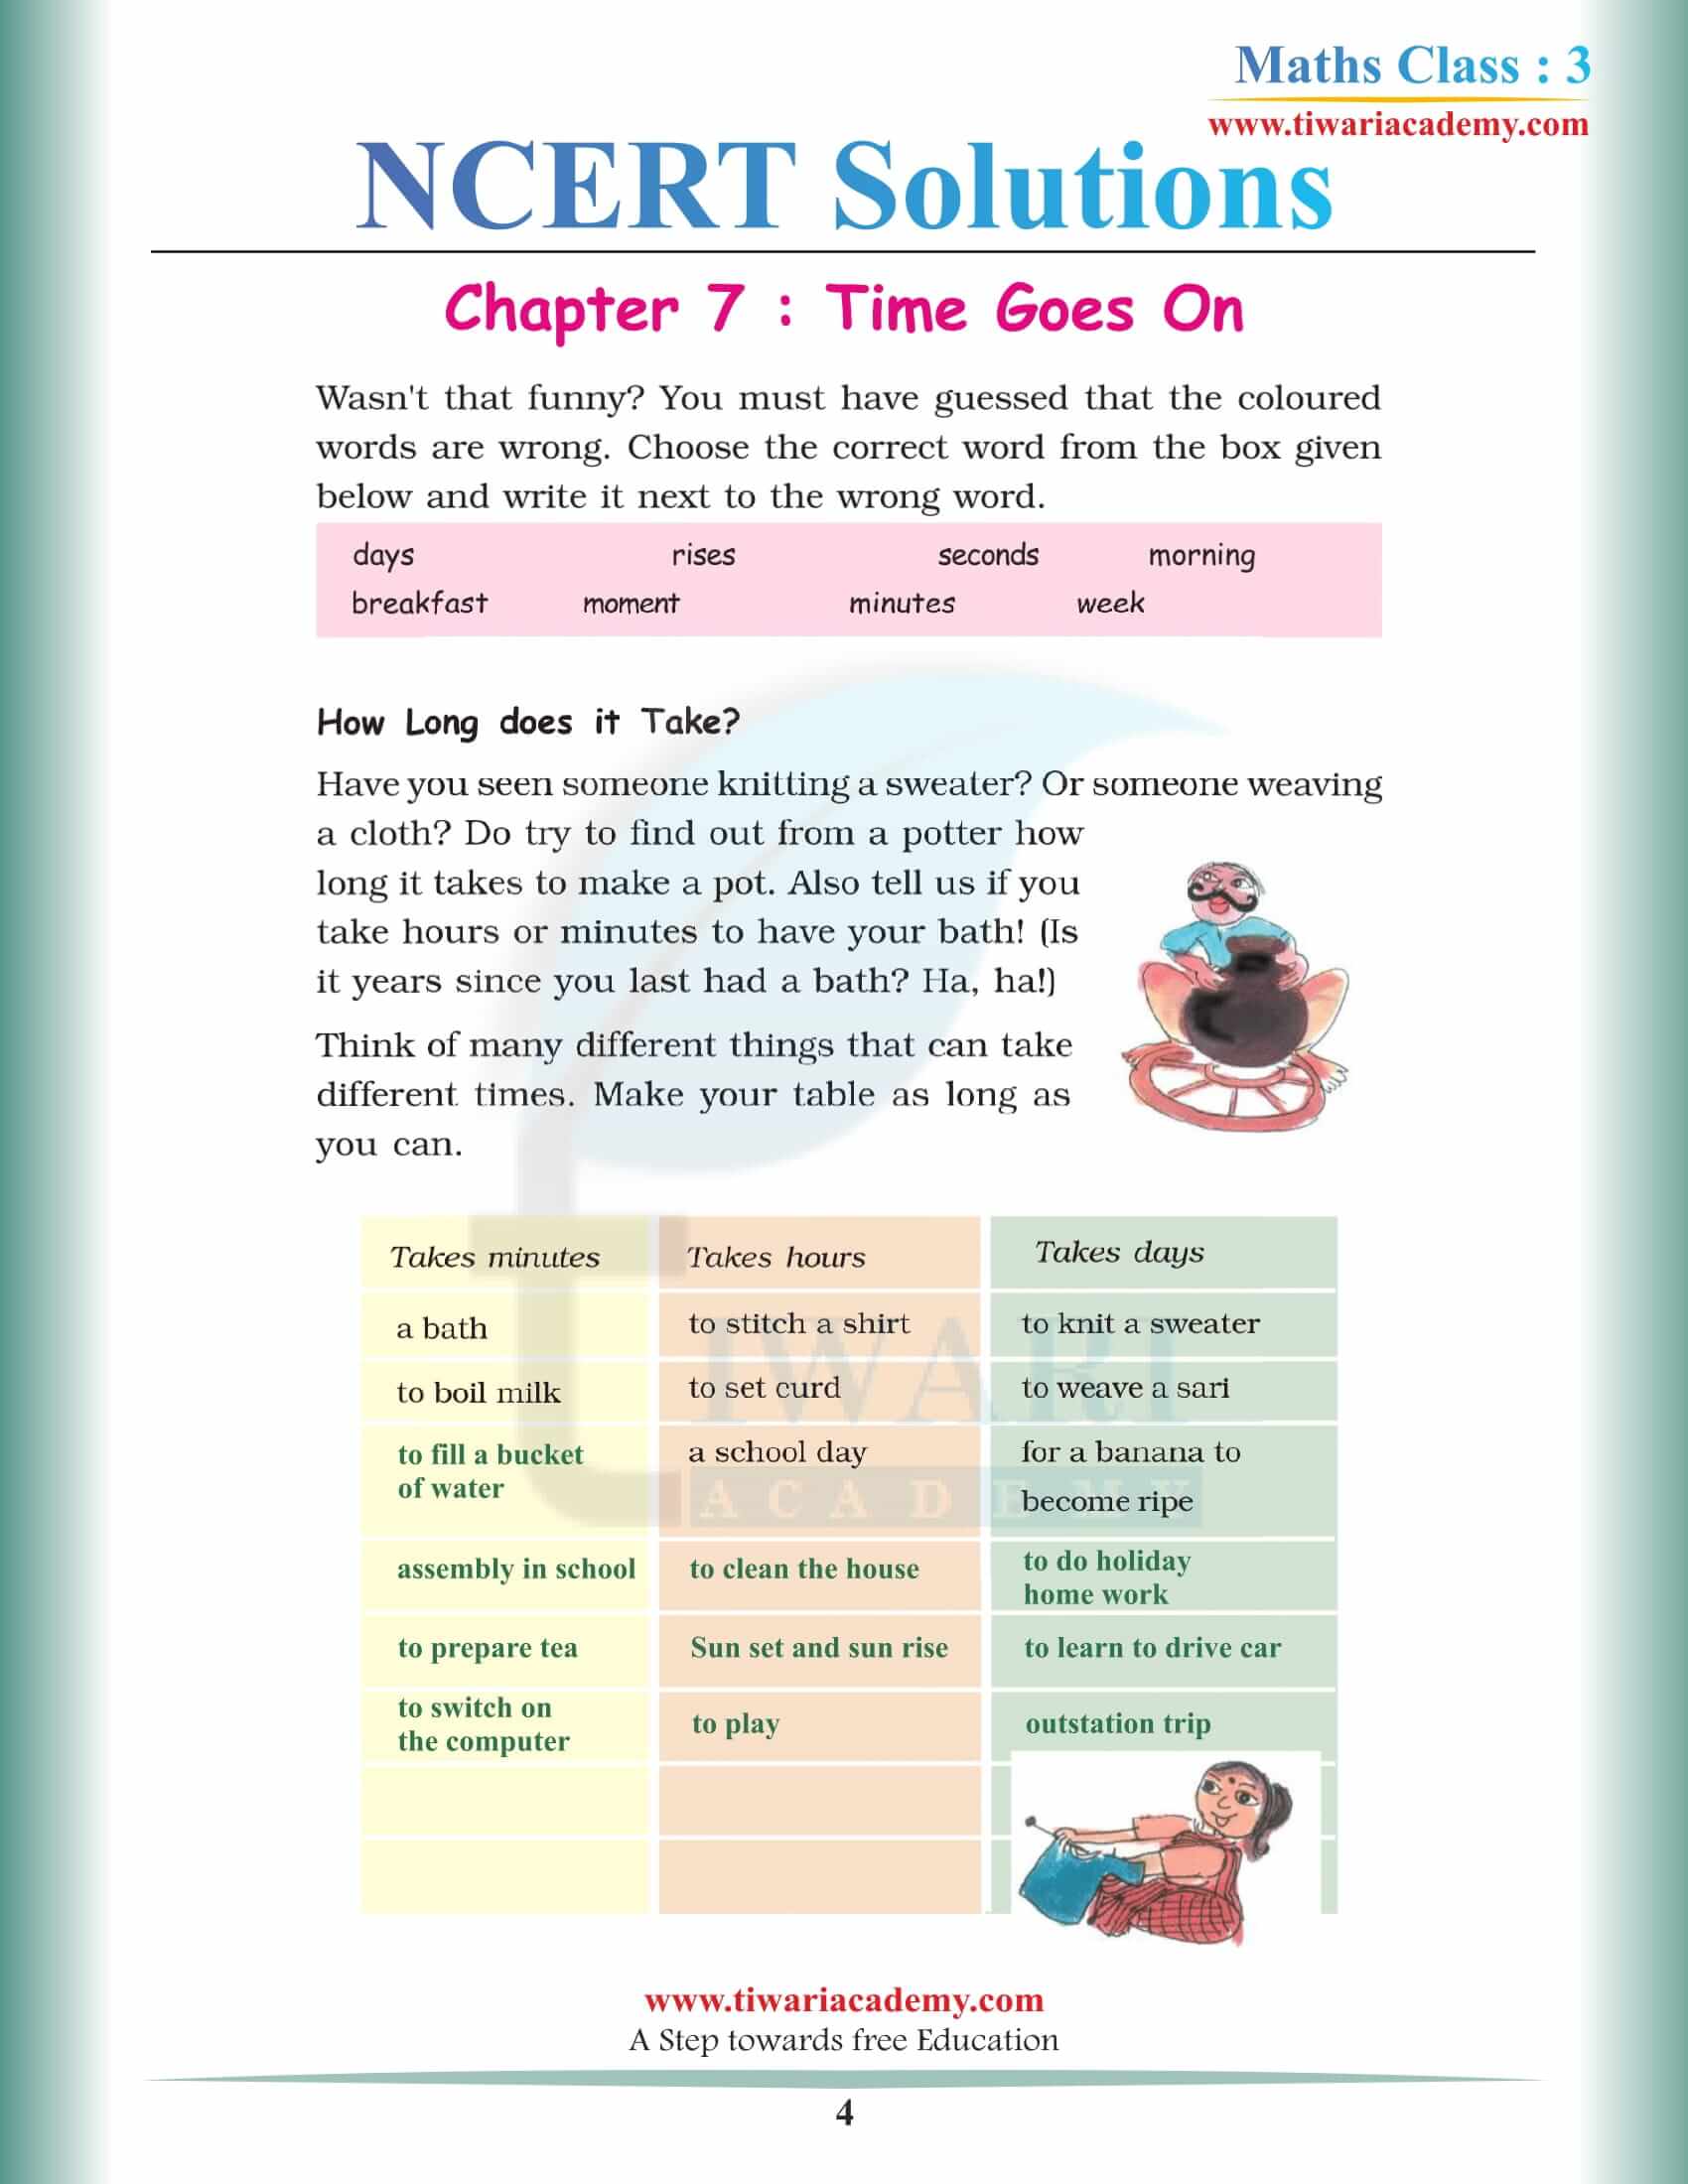 NCERT Solutions for Class 3 Maths Chapter 7 in English Medium